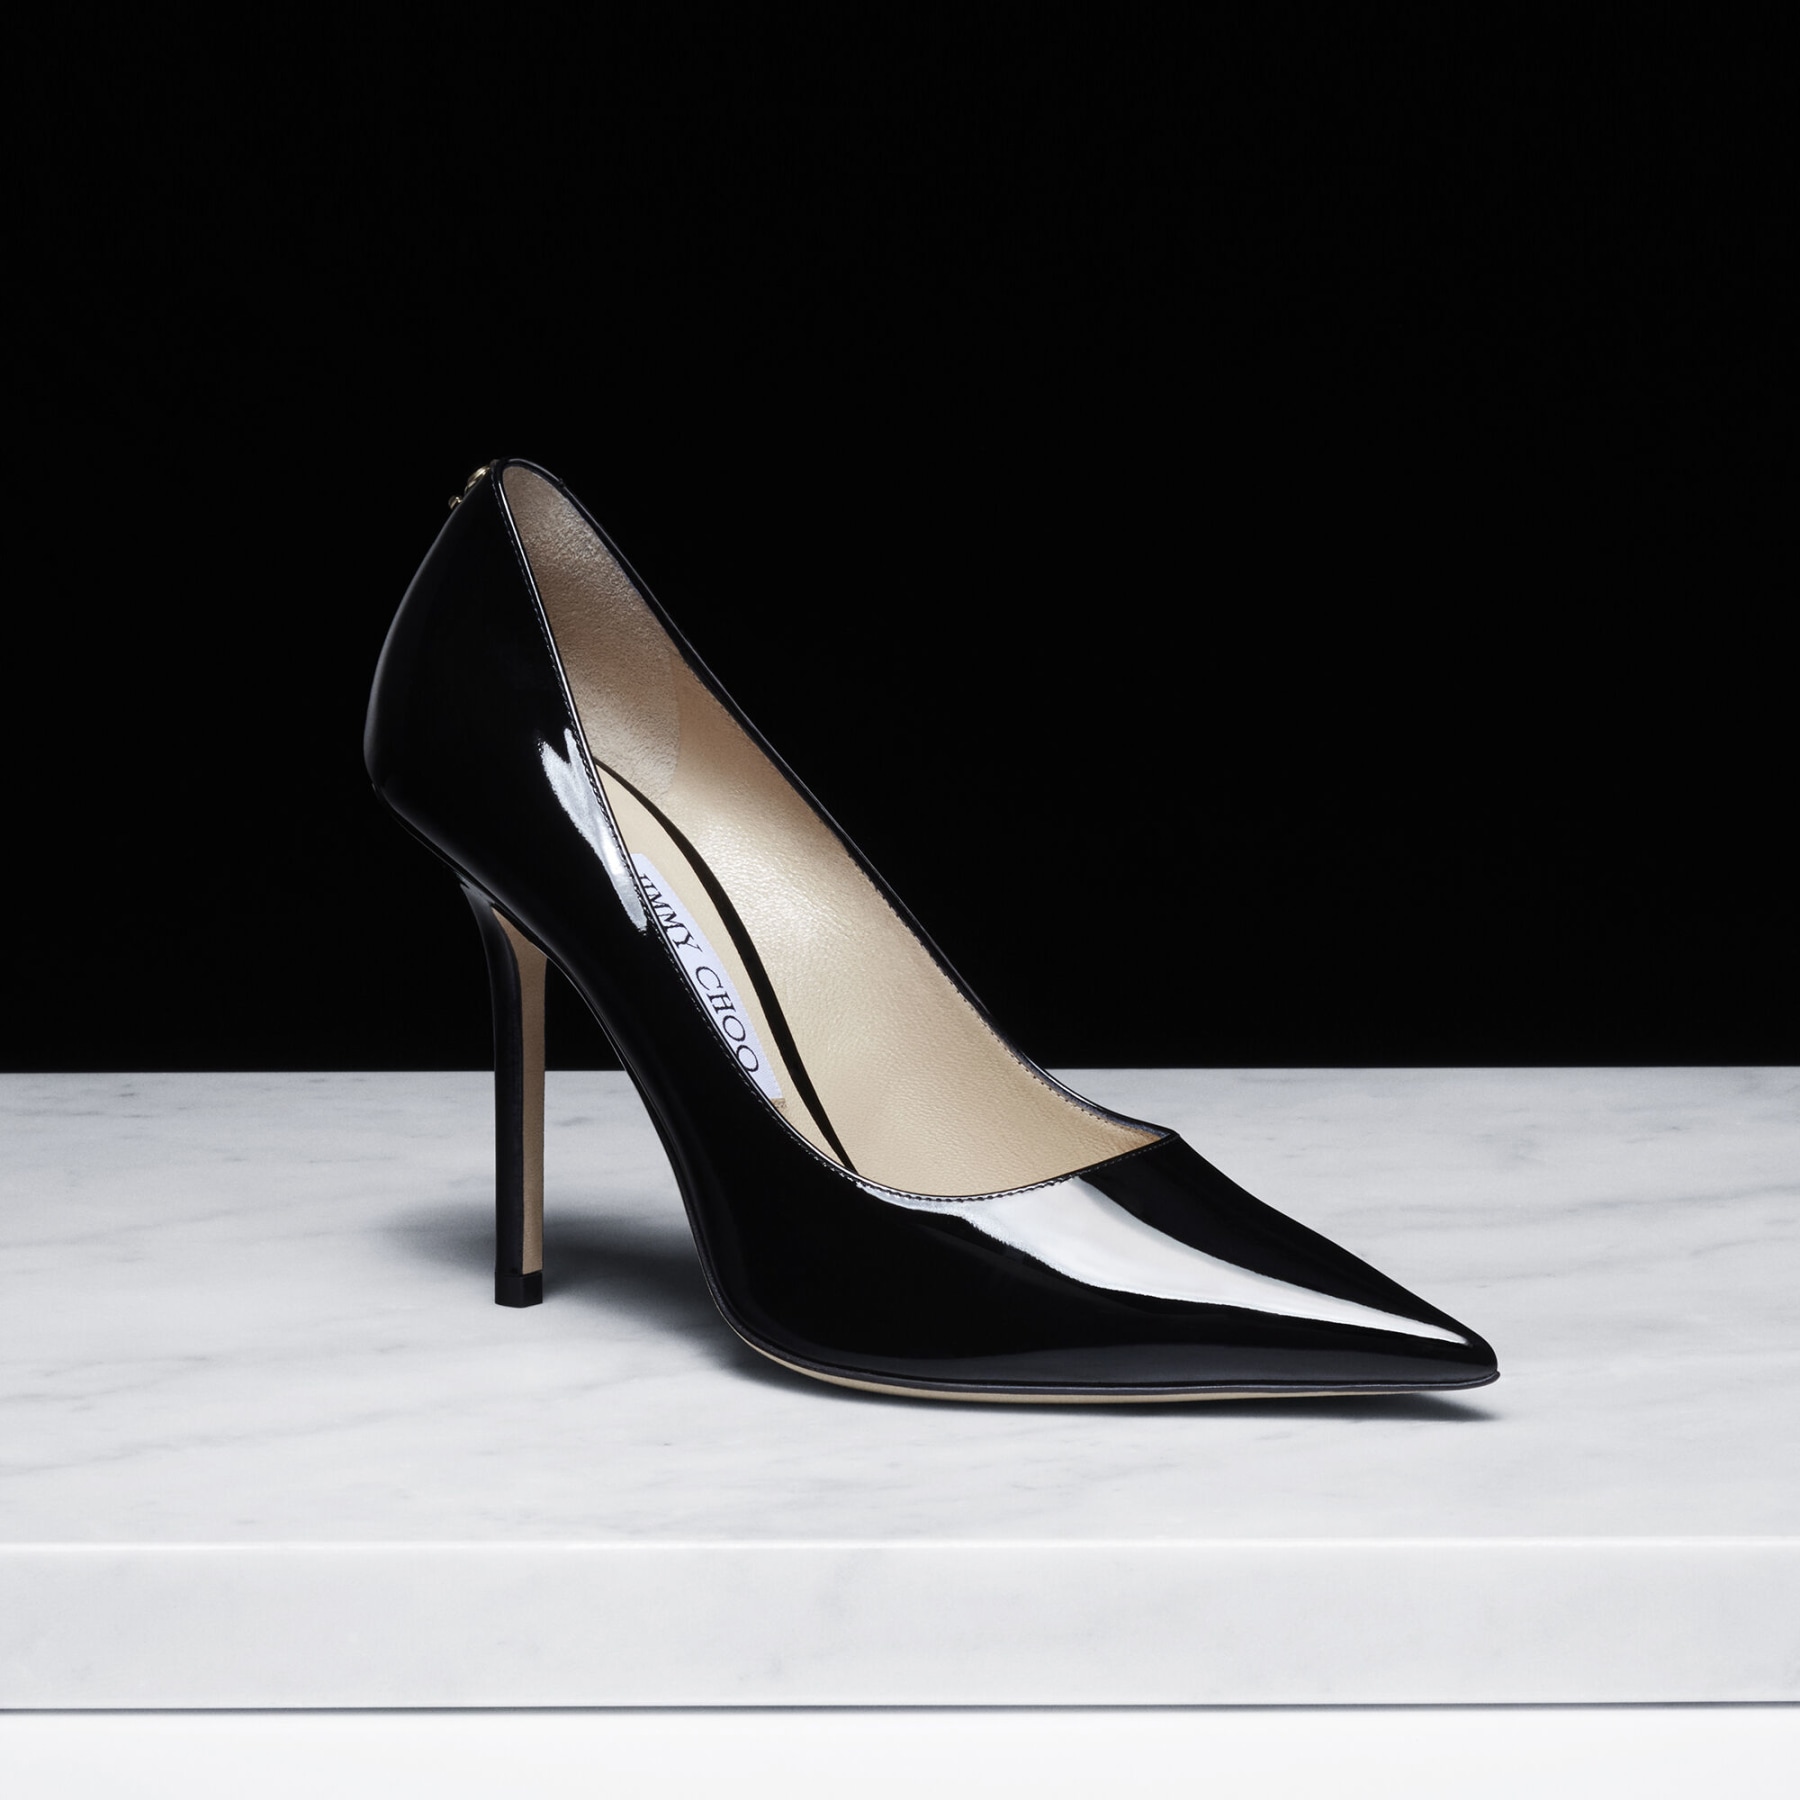 Black Patent Leather Pointed-Toe Pumps with JC Emblem | LOVE 100 ...